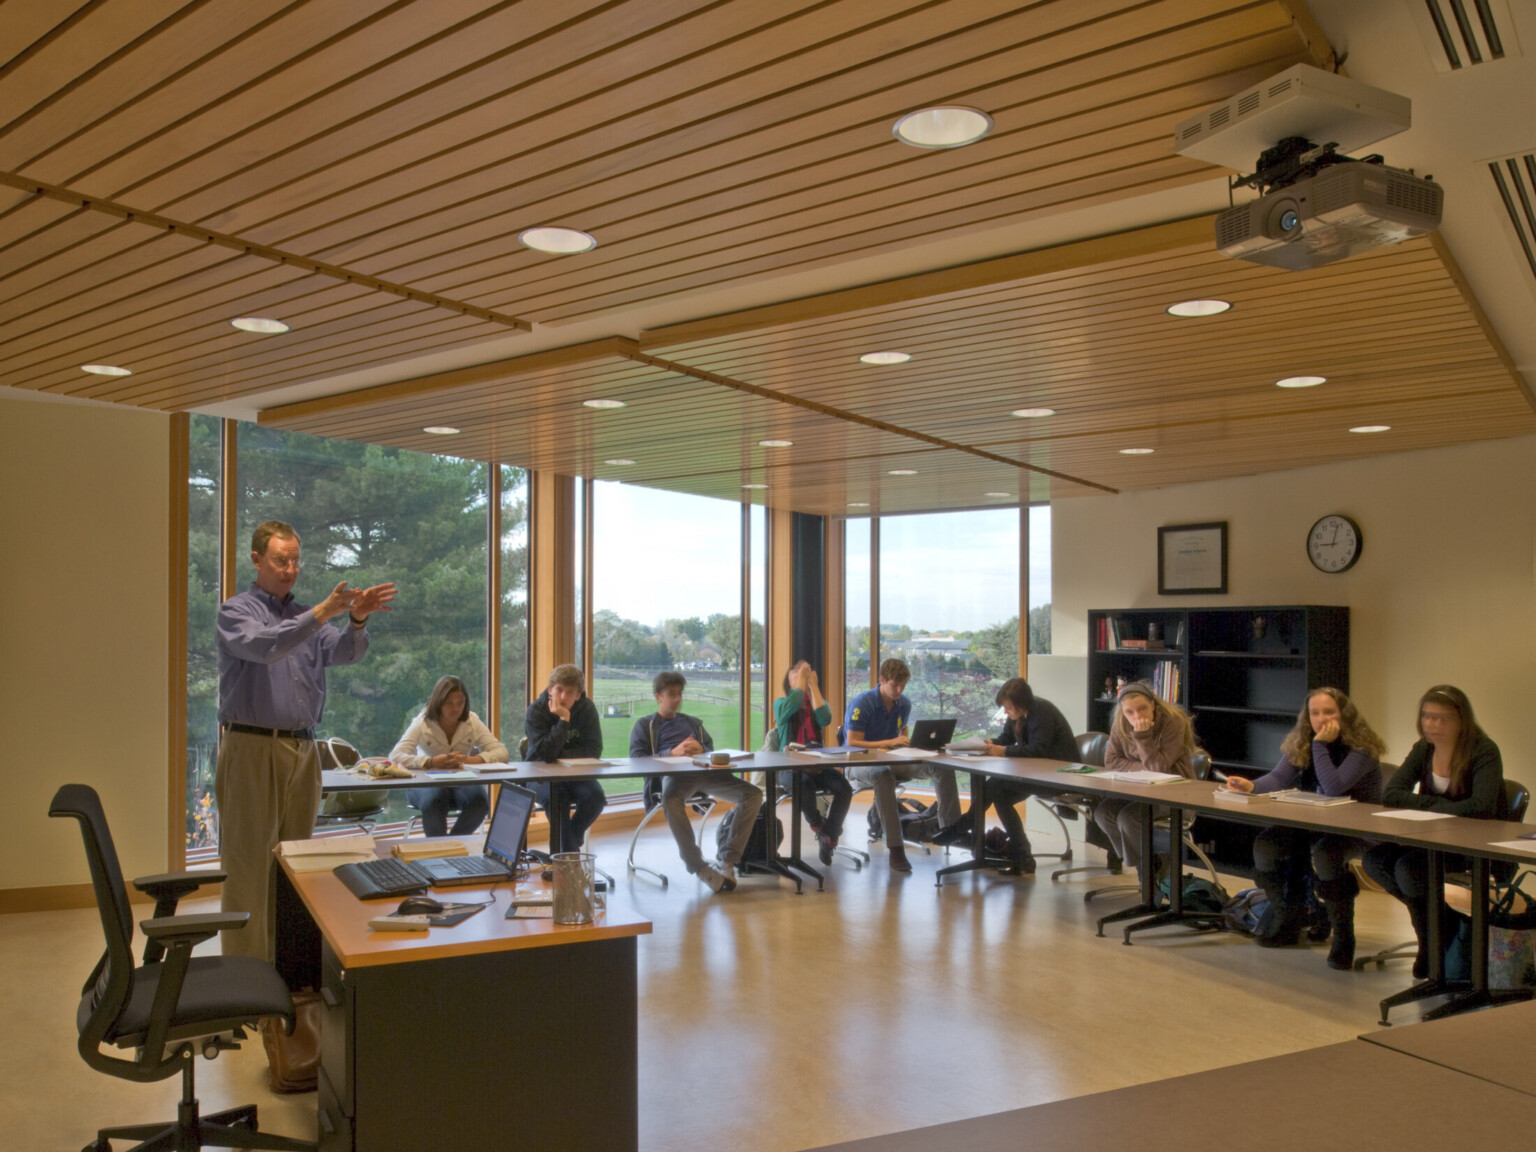 Conference room learning space with floor to ceiling windows, students sit at long tables angled toward desk and projector